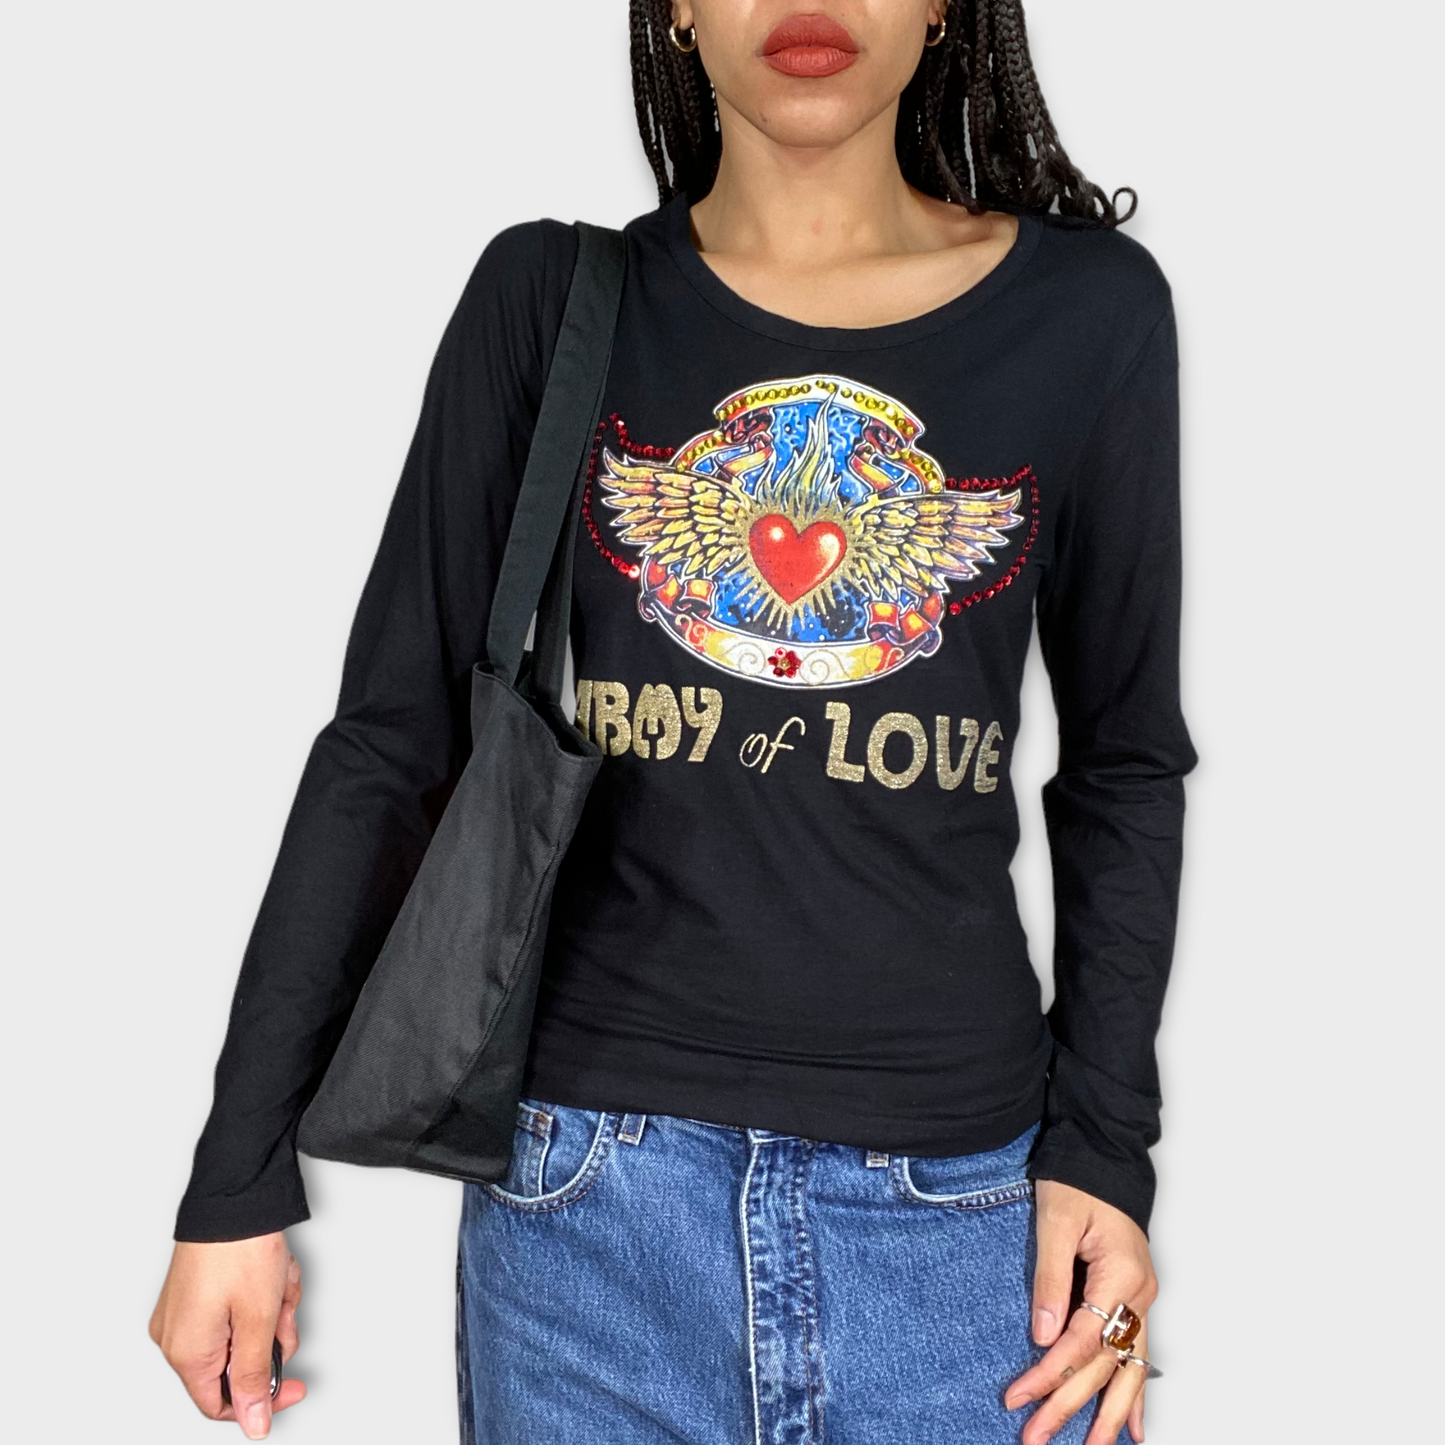 Vintage 2000's Amor & Psych Black Longsleeve with Winged Heart Print (L)